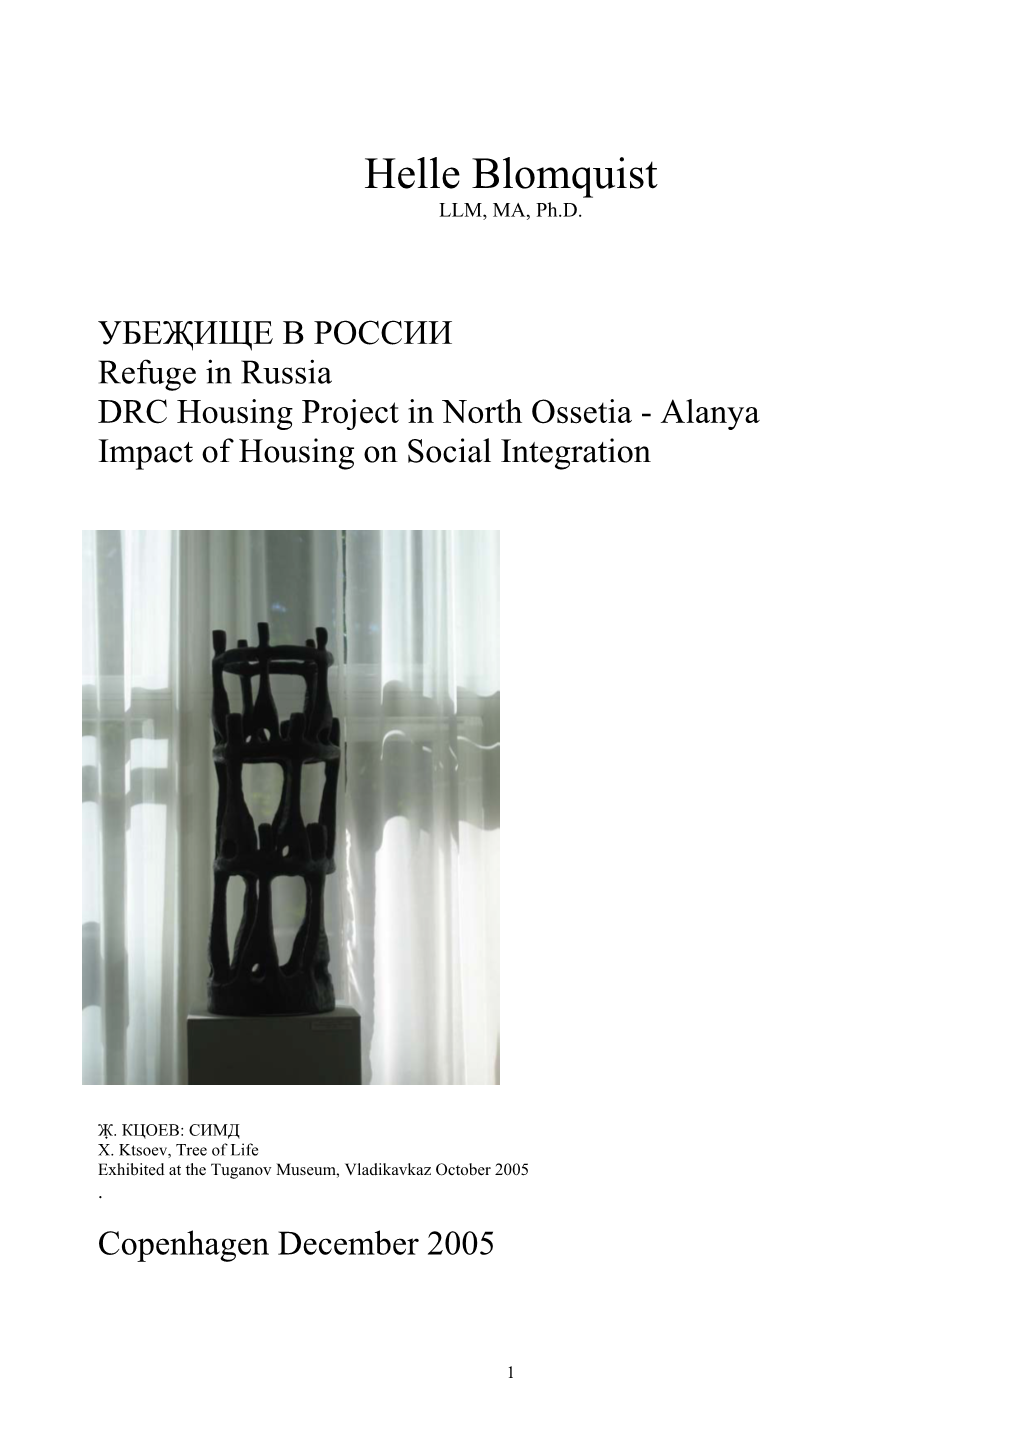 Housing Pojects in North Ossetia